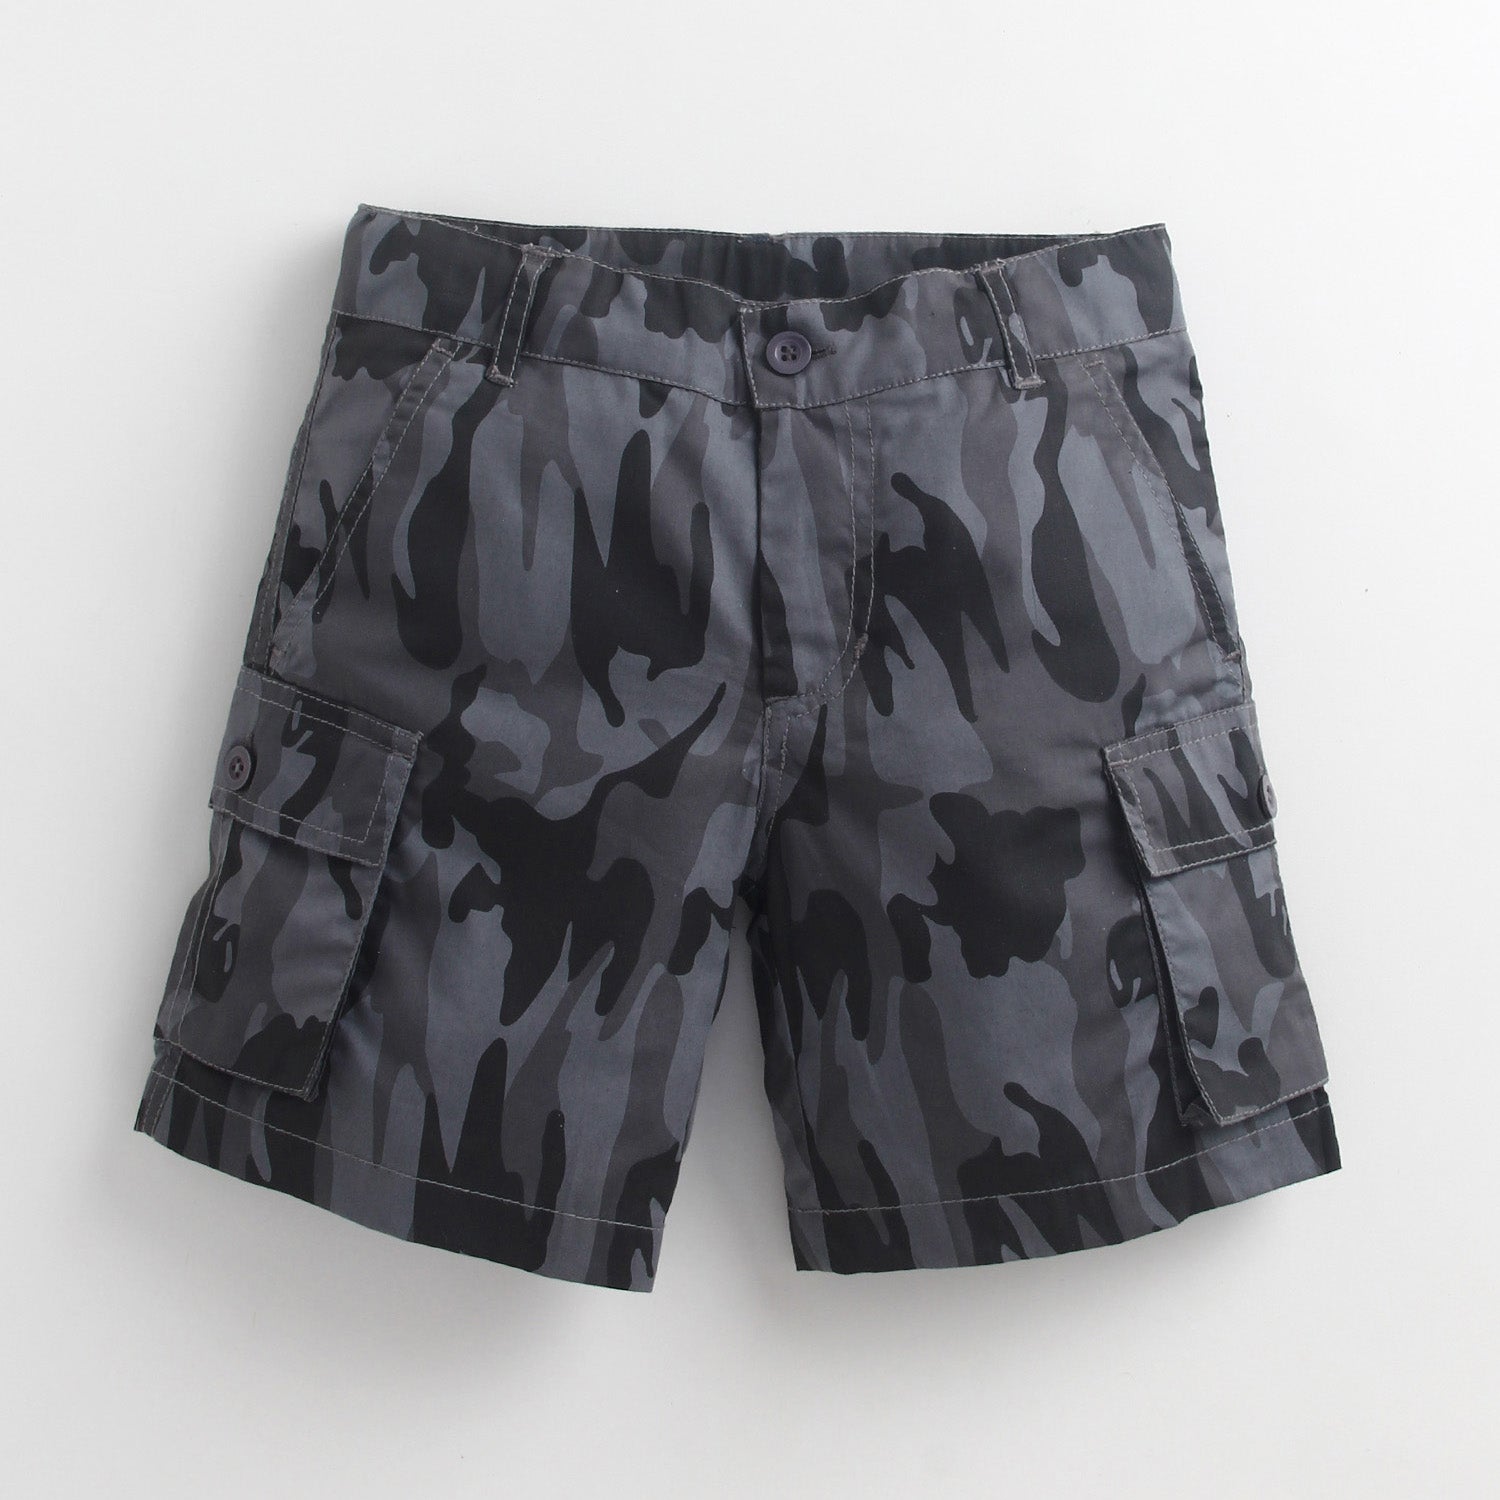 Disguise Shorts